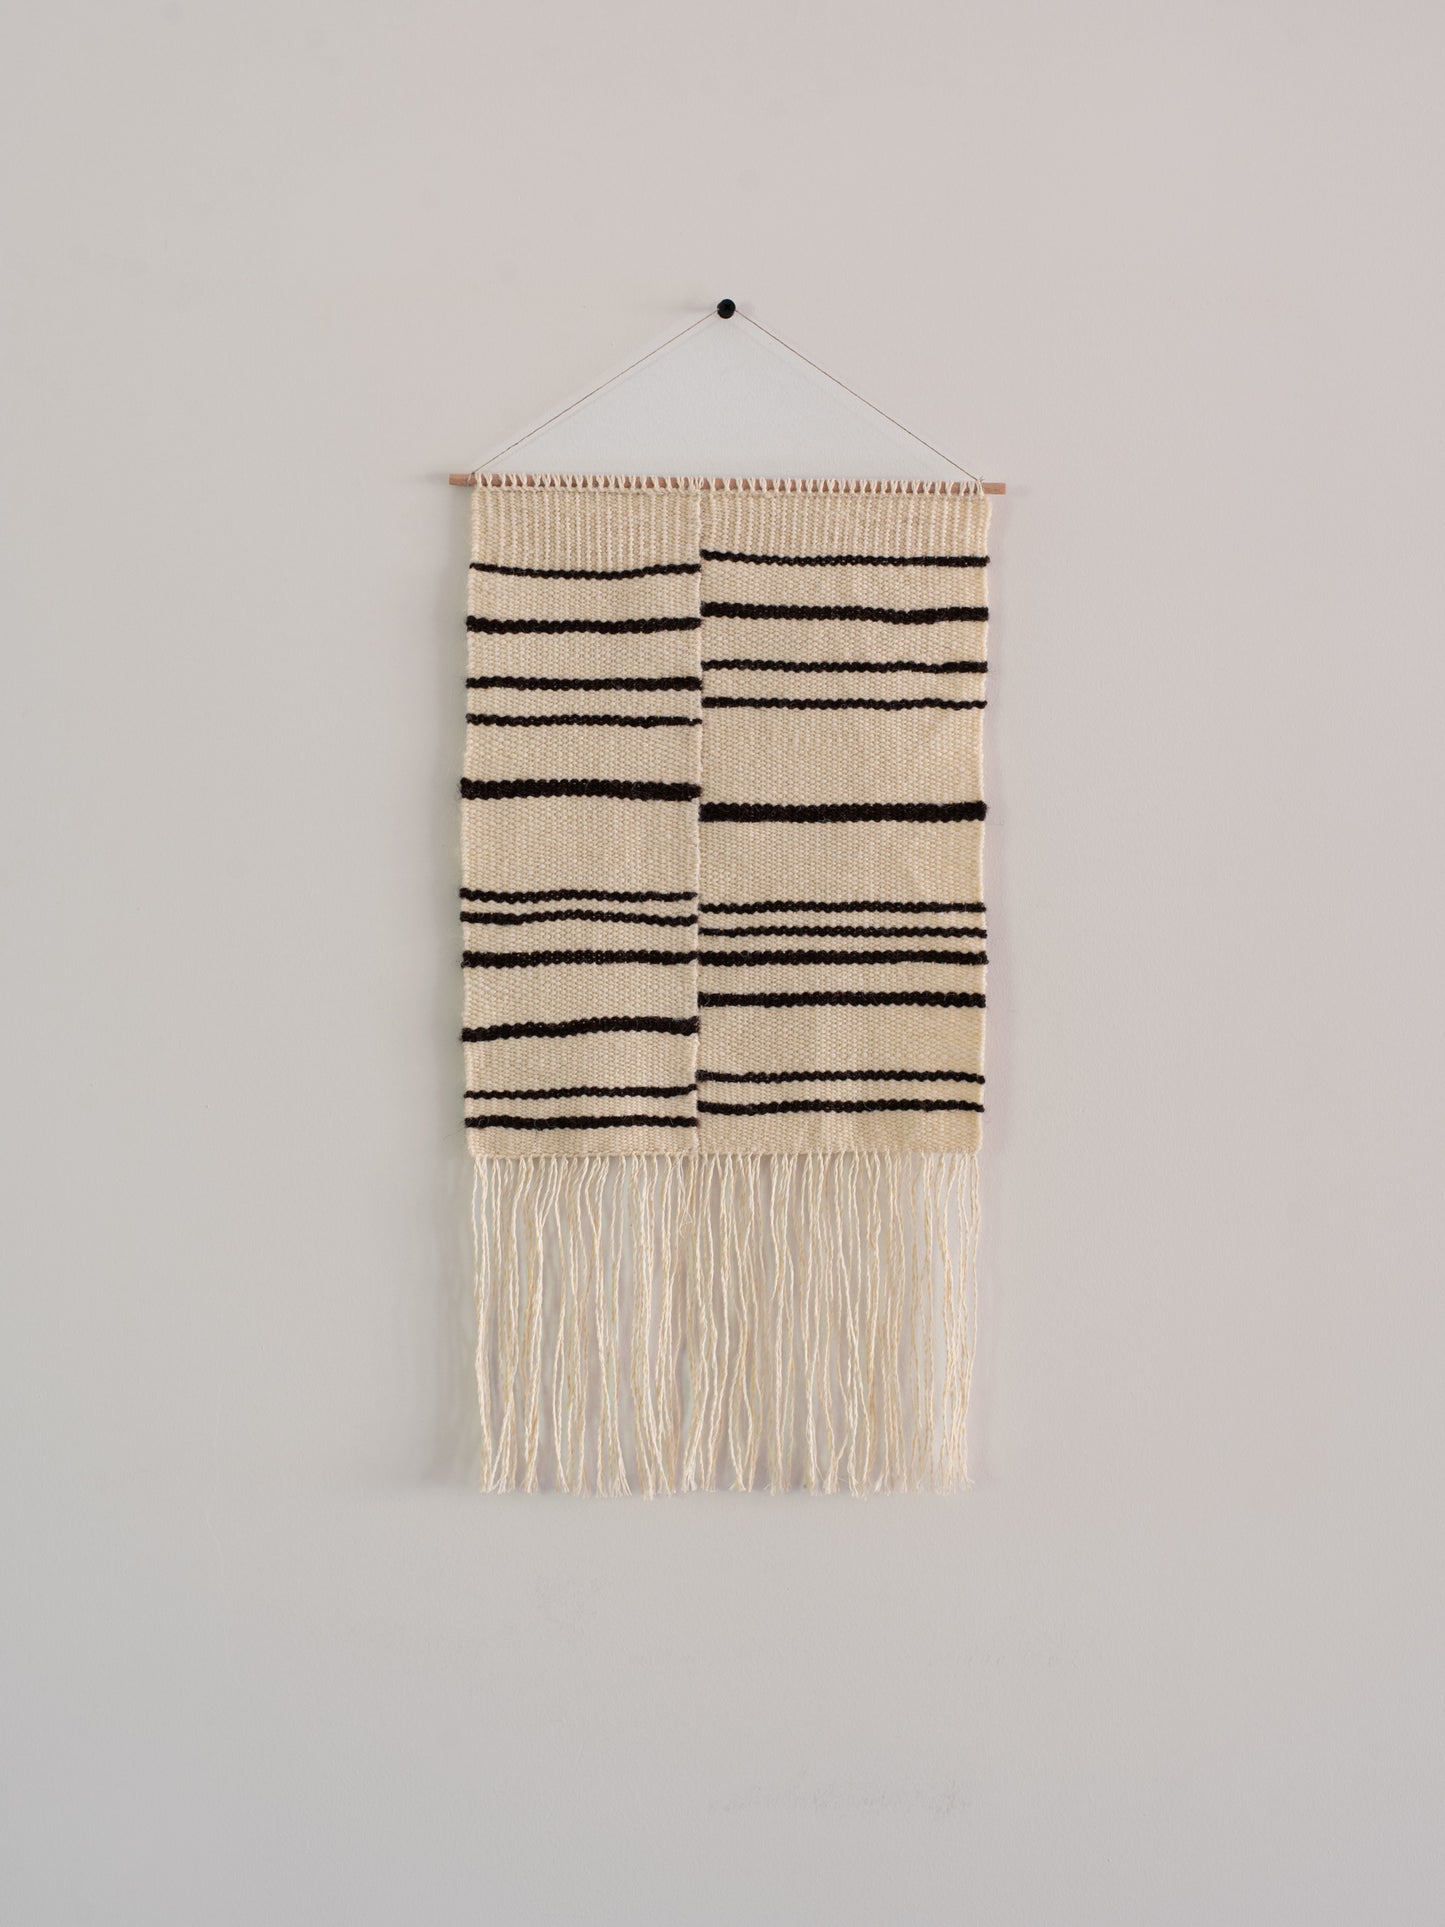 Wall Hanging - Wool & Paper I